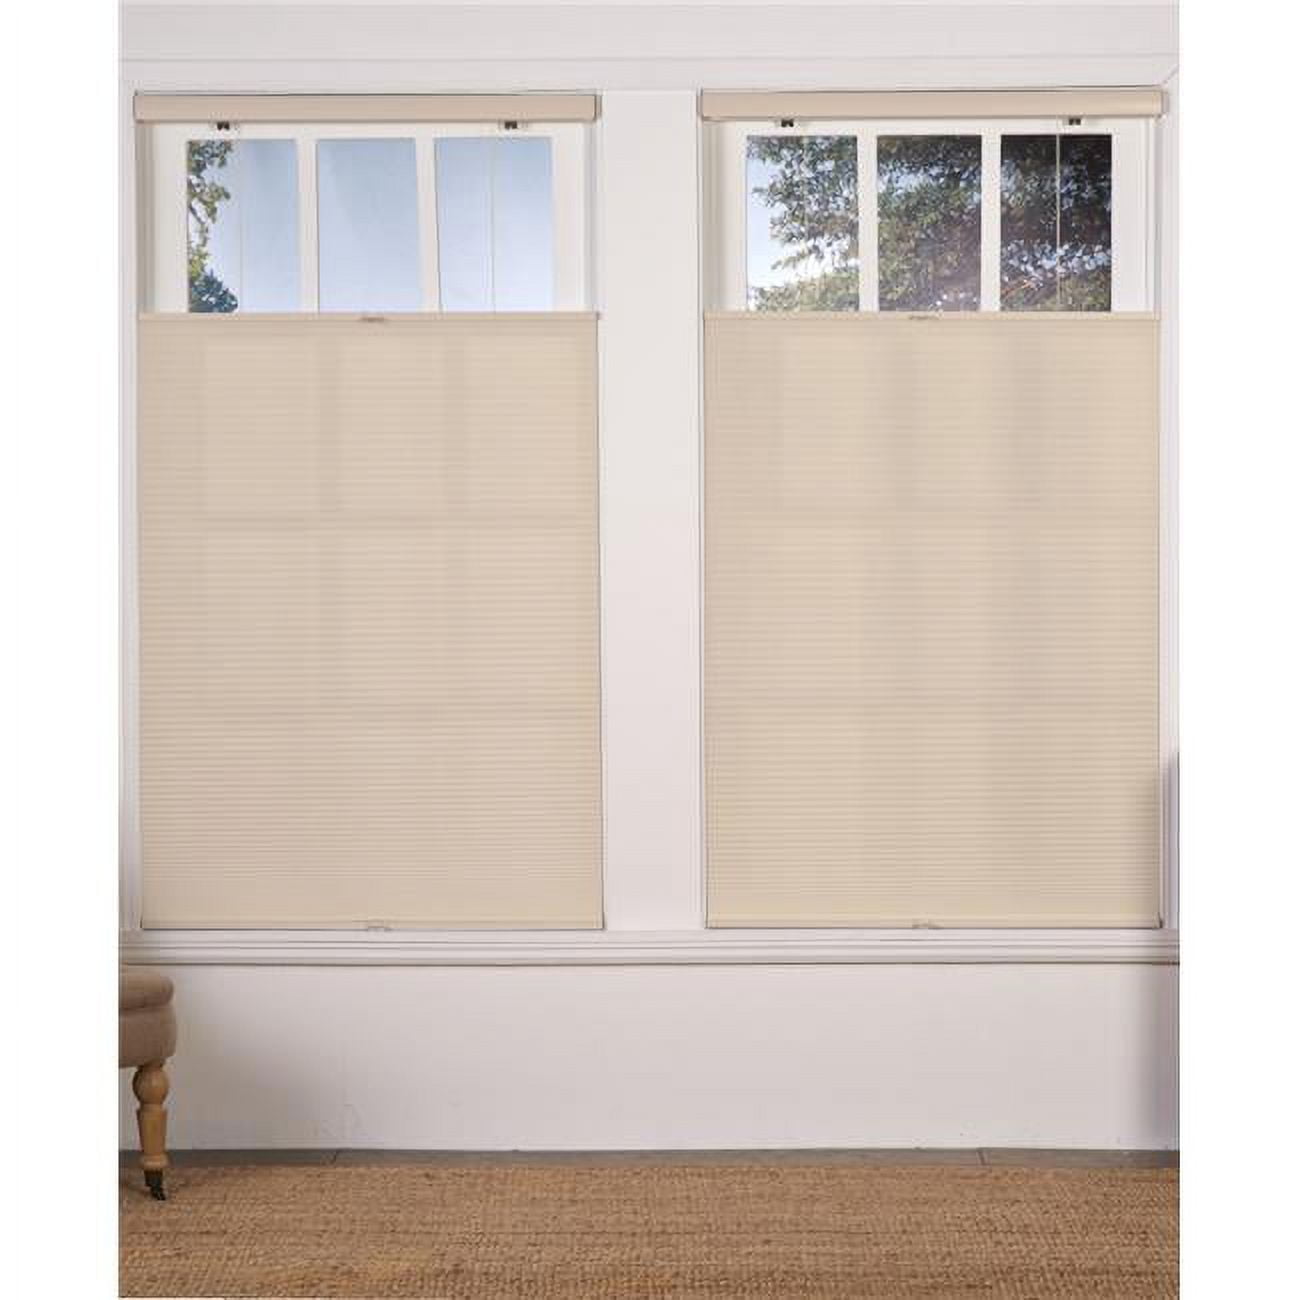 Safe Styles UBG295X64AL Cordless Light Filtering Top Down Bottom Up Shade, Alabaster - 29.5 x 64 in.